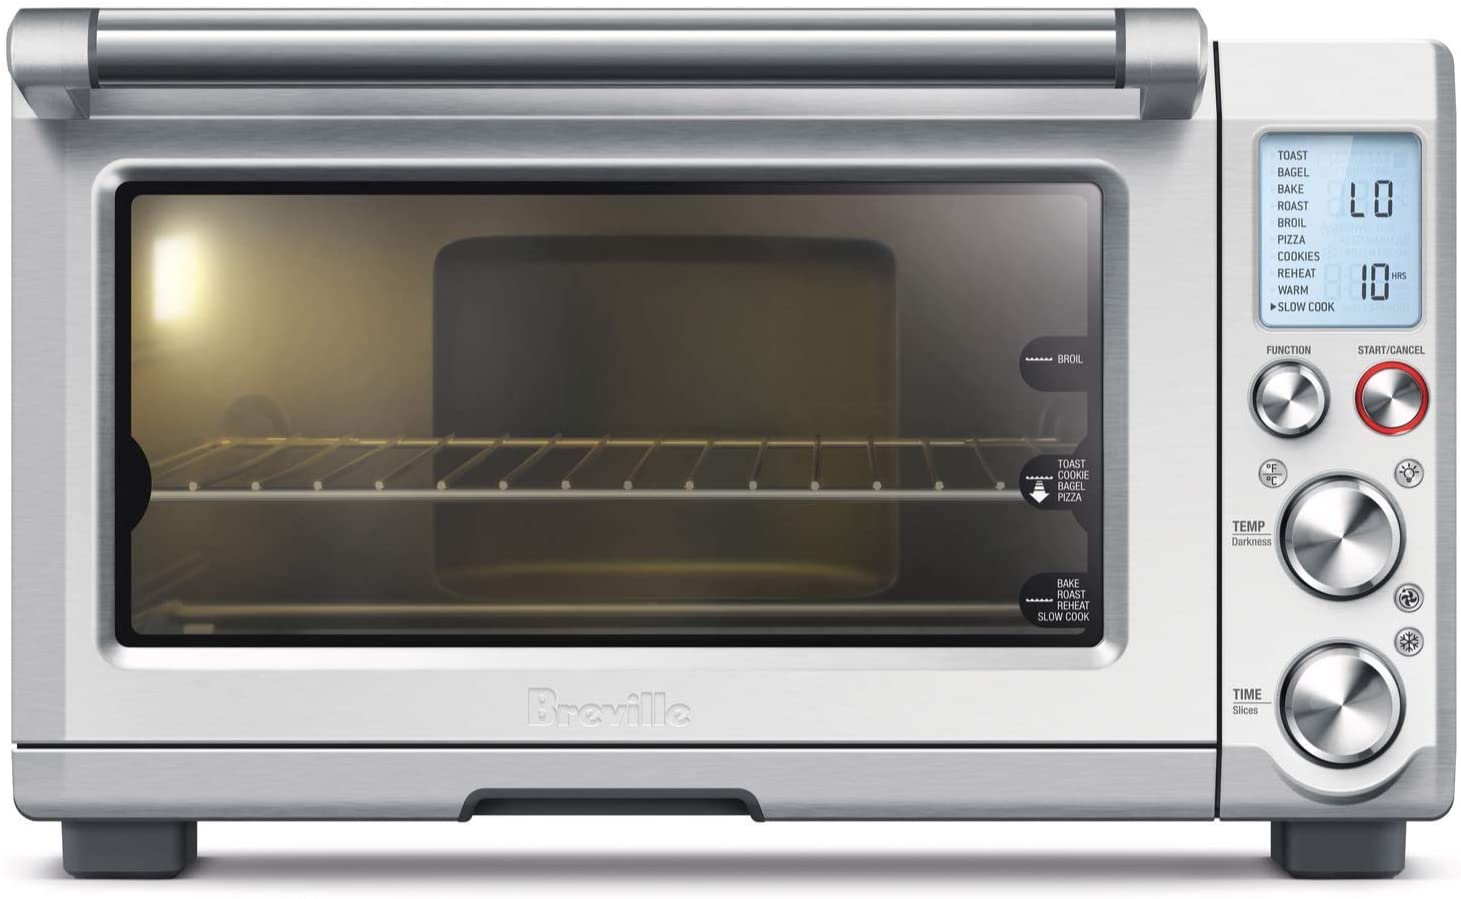 Breville bov845bss convection oven